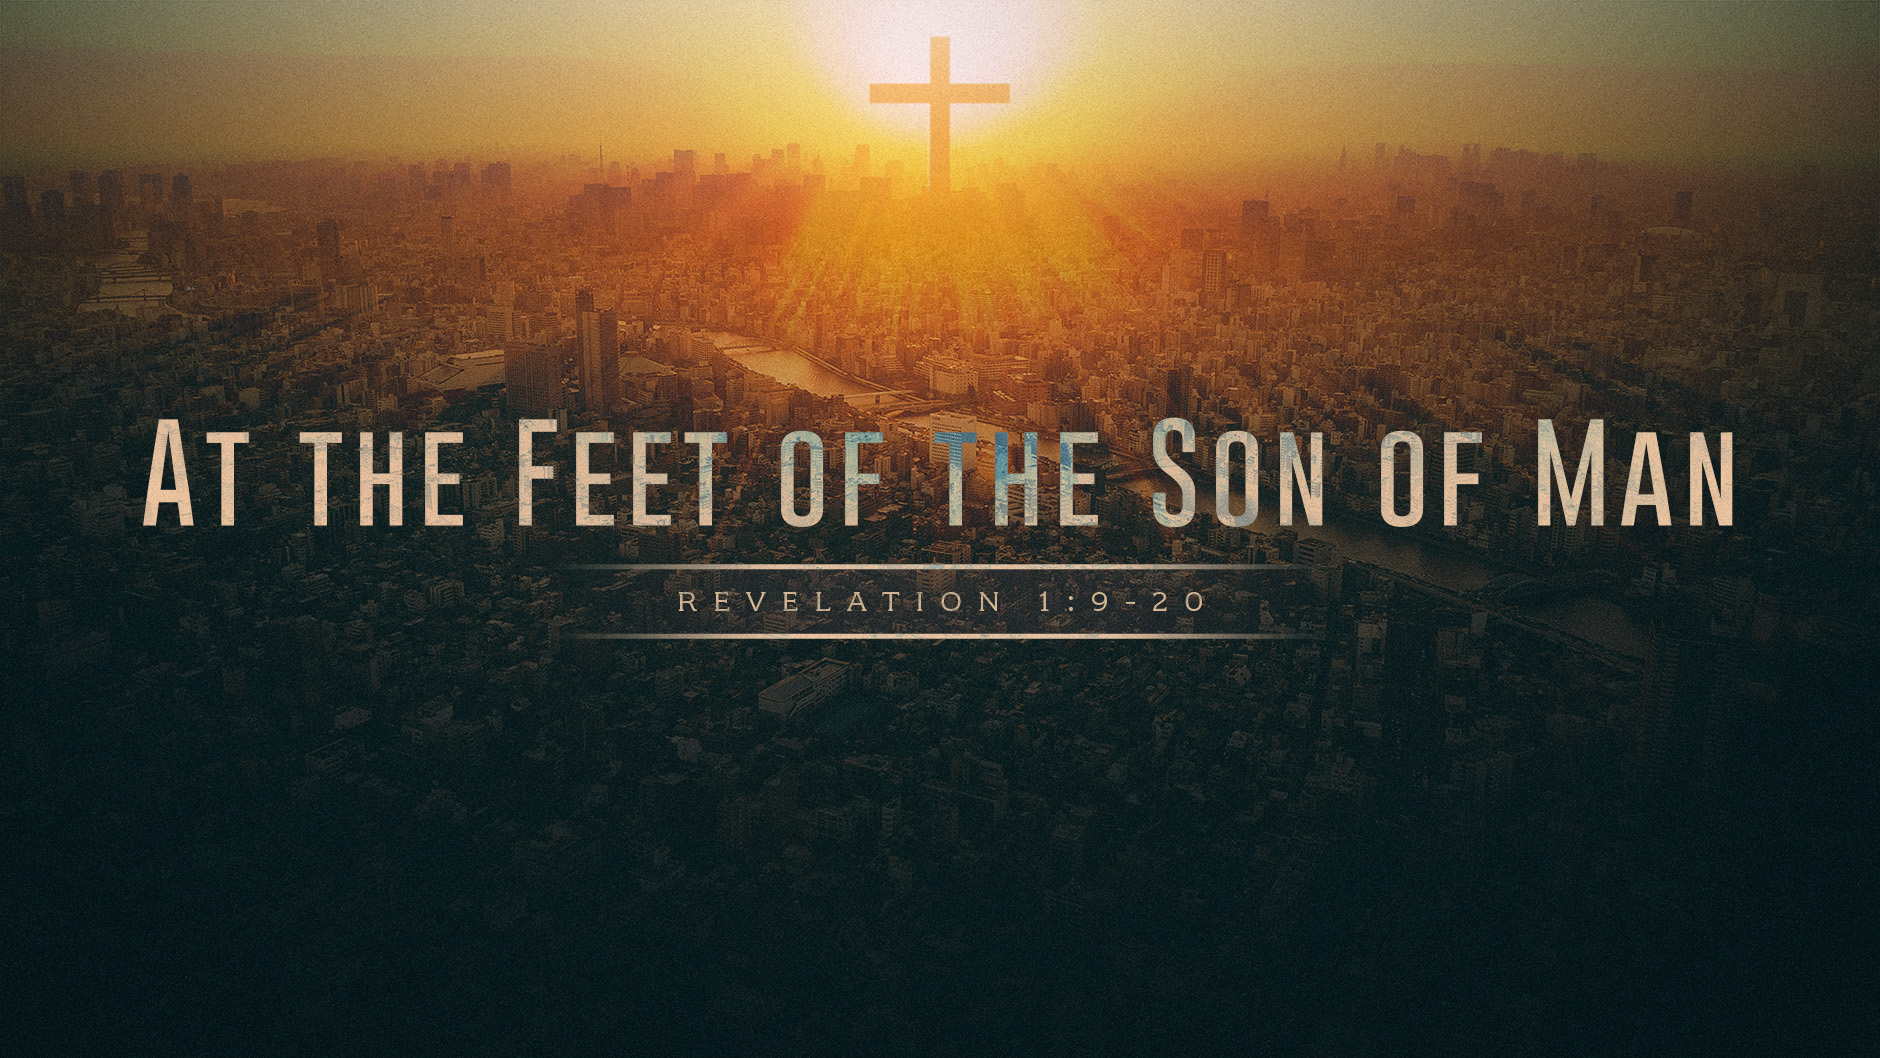 SERMON - At the Feet of the Son of Man